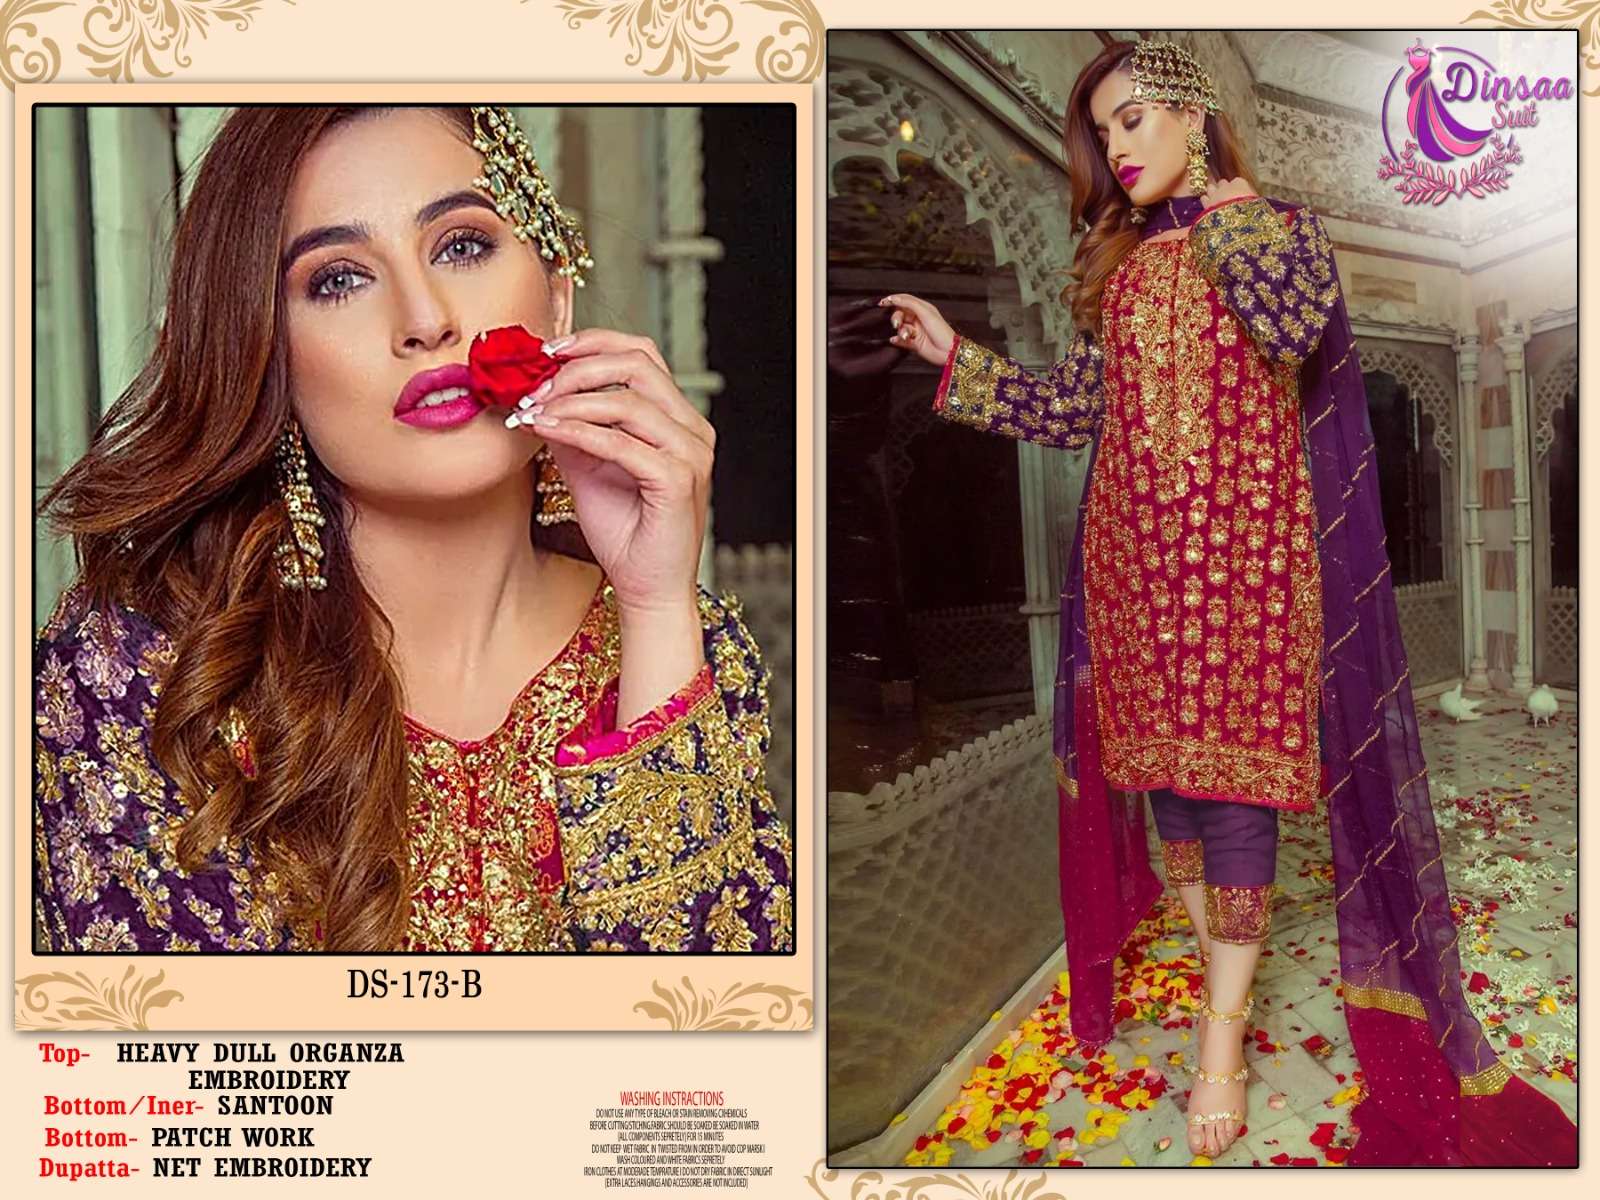 DINSAA SUITS PRESENTS 173 COLOURS ORGANZA HEAVY EMBROIDERY WHOLESALE PAKISTANI SUITS